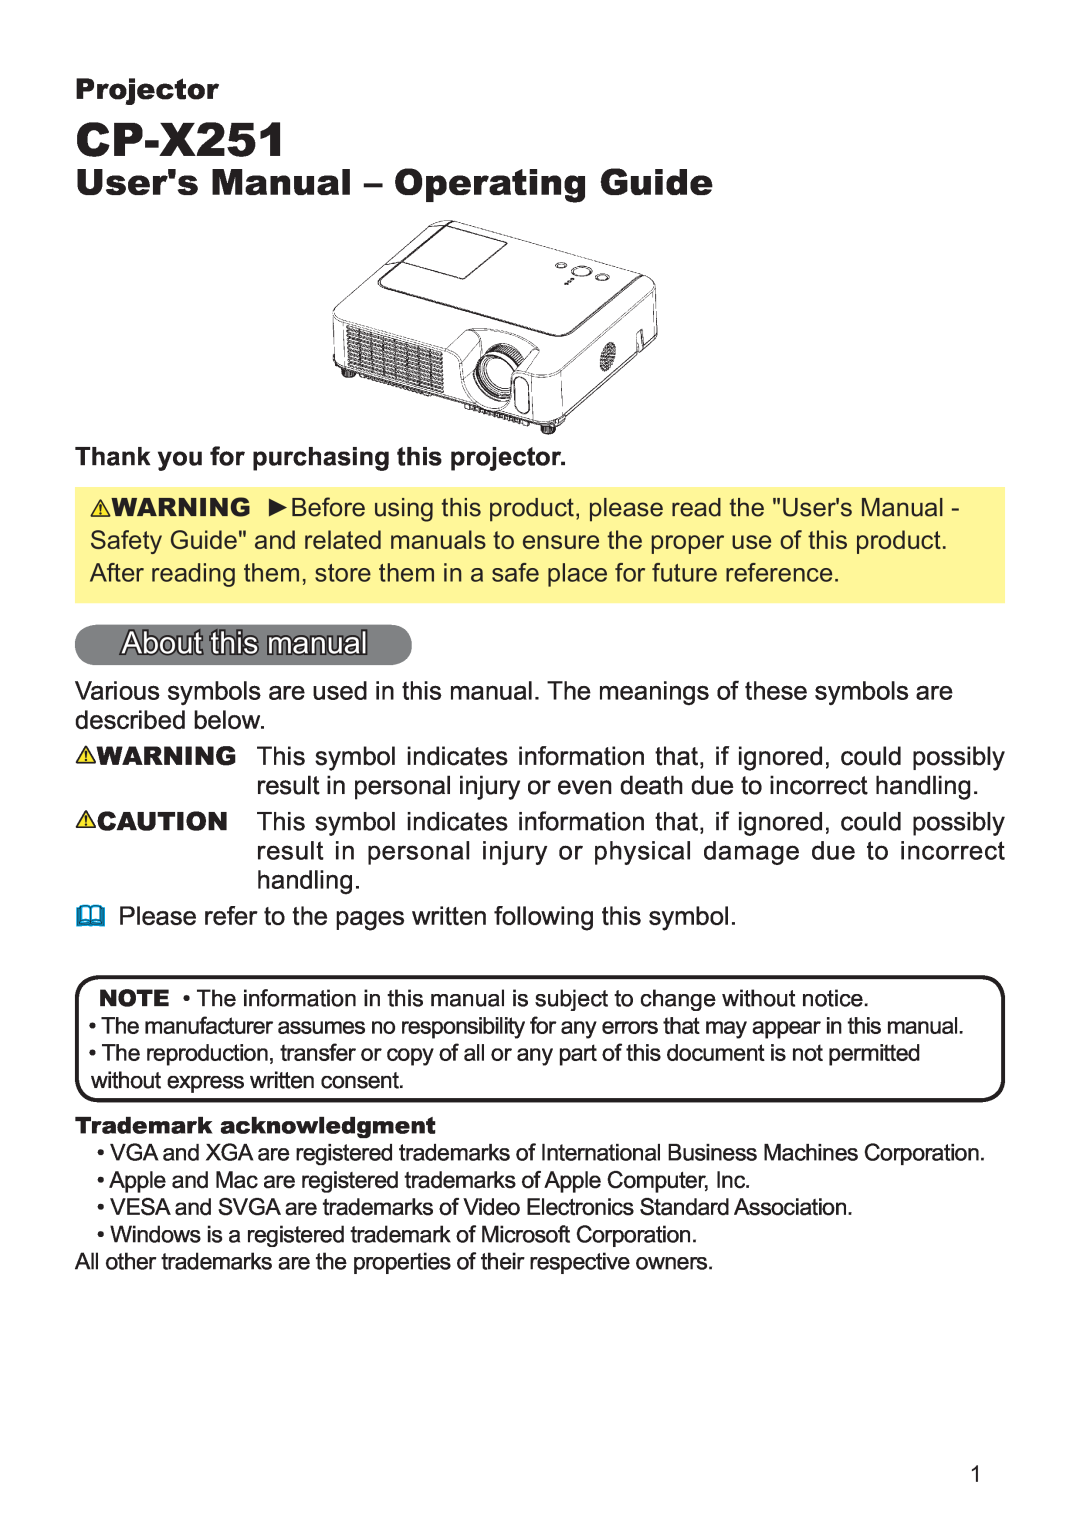 Hitachi CP-X251 user manual About this manual, Thank you for purchasing this projector, Users Manual - Operating Guide 